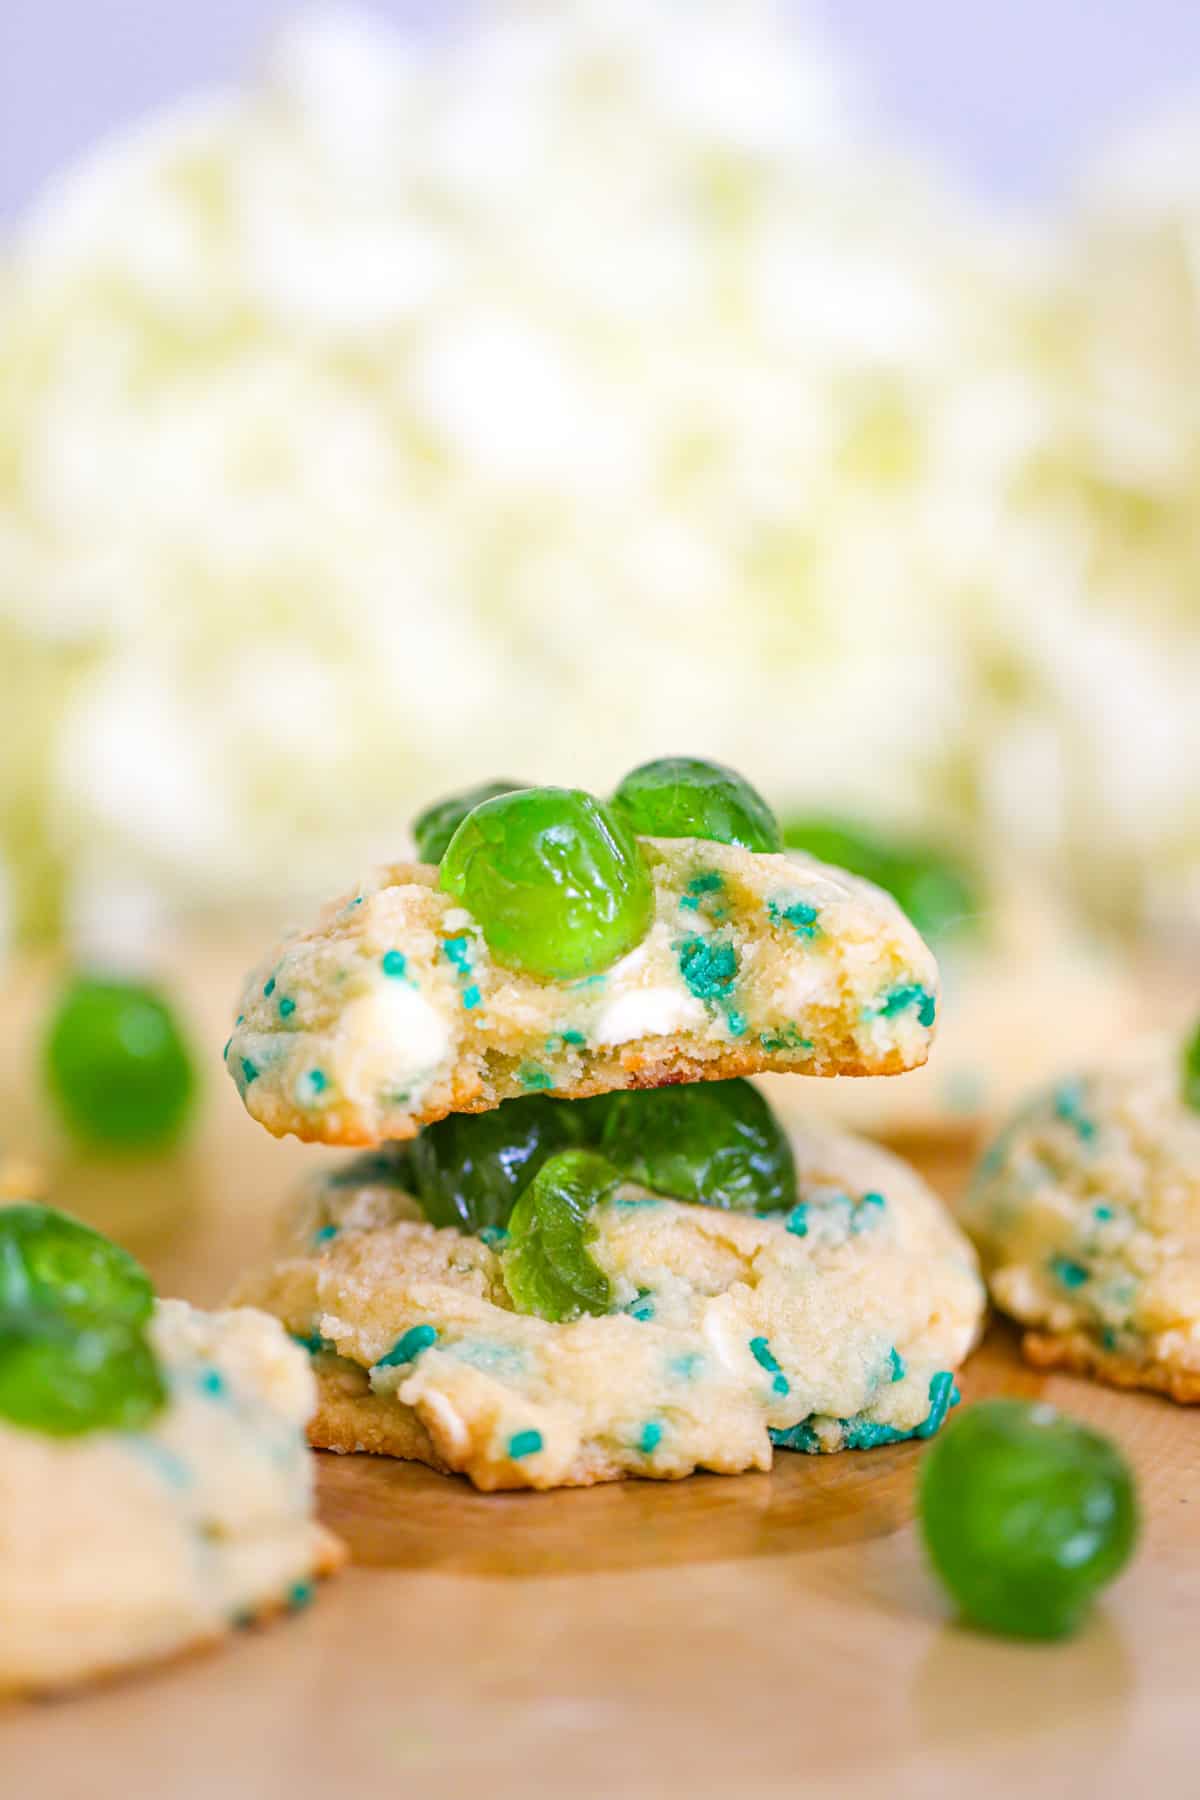 stack of Irish baked goods with green color